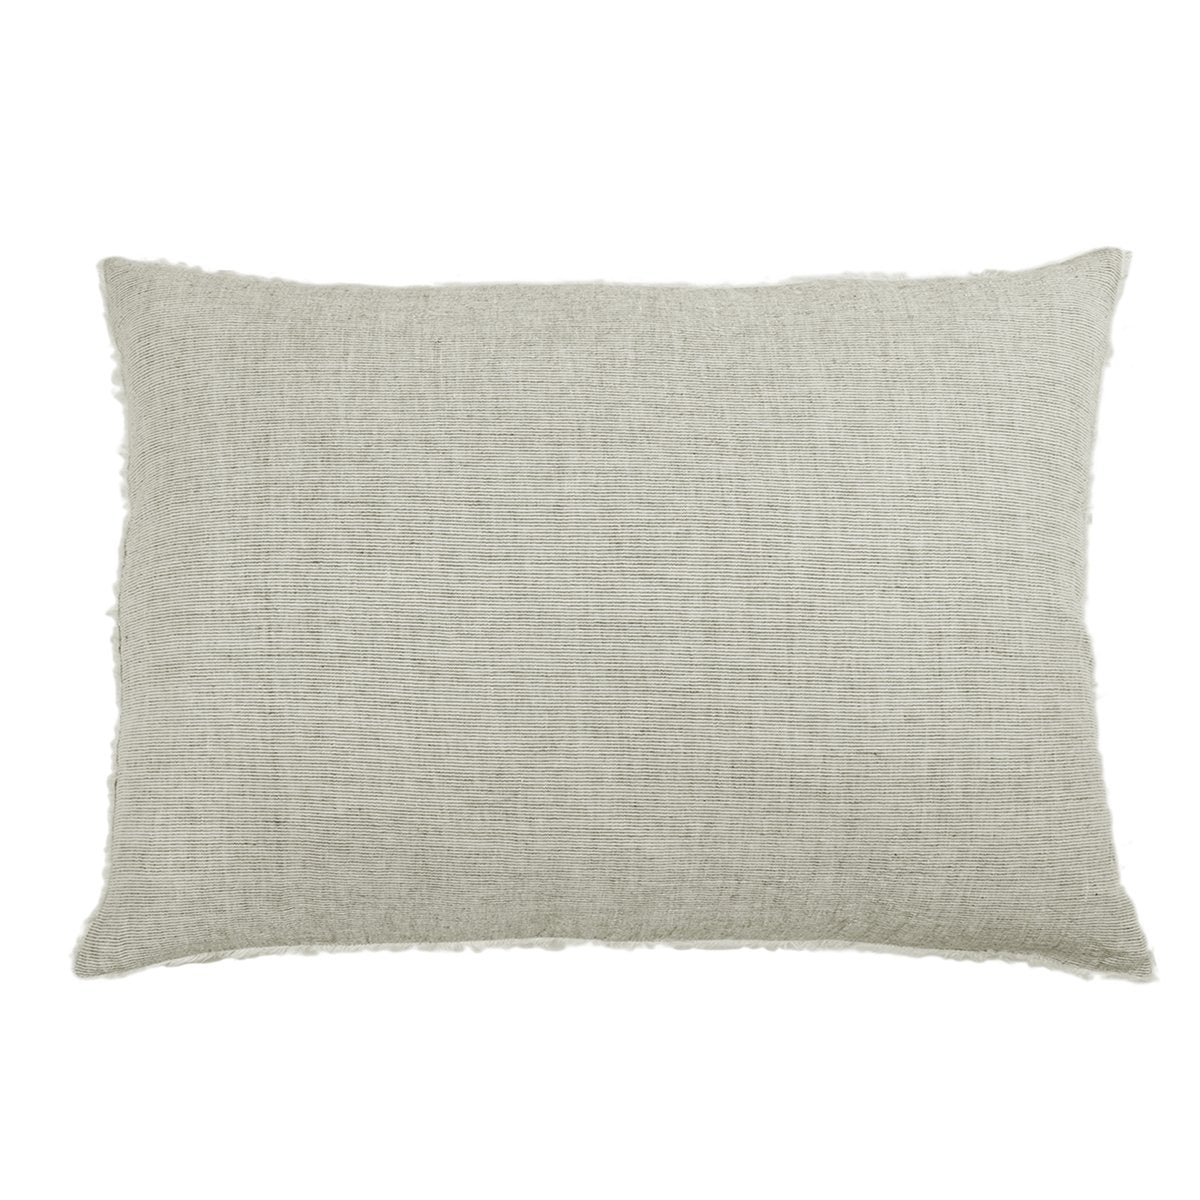 Logan Olive Big Pillow by Pom at Home